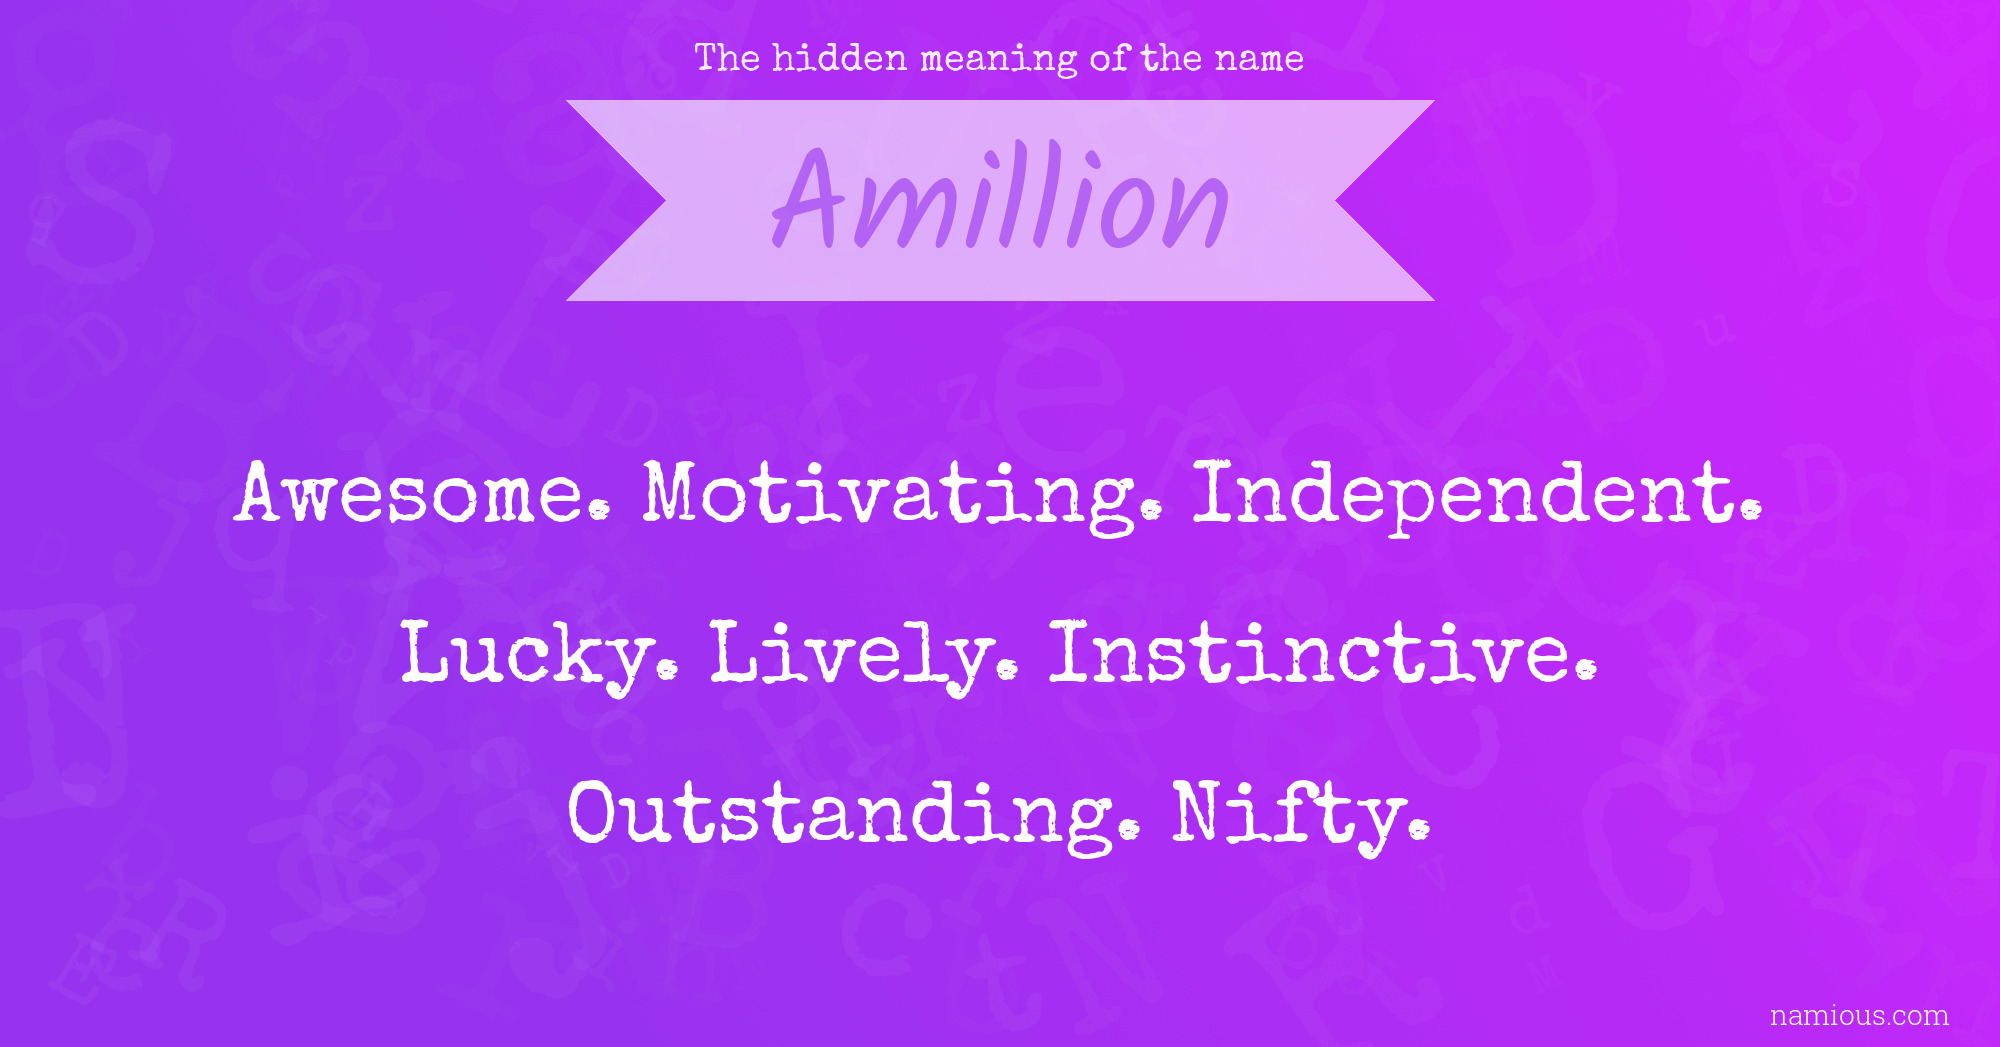 The hidden meaning of the name Amillion